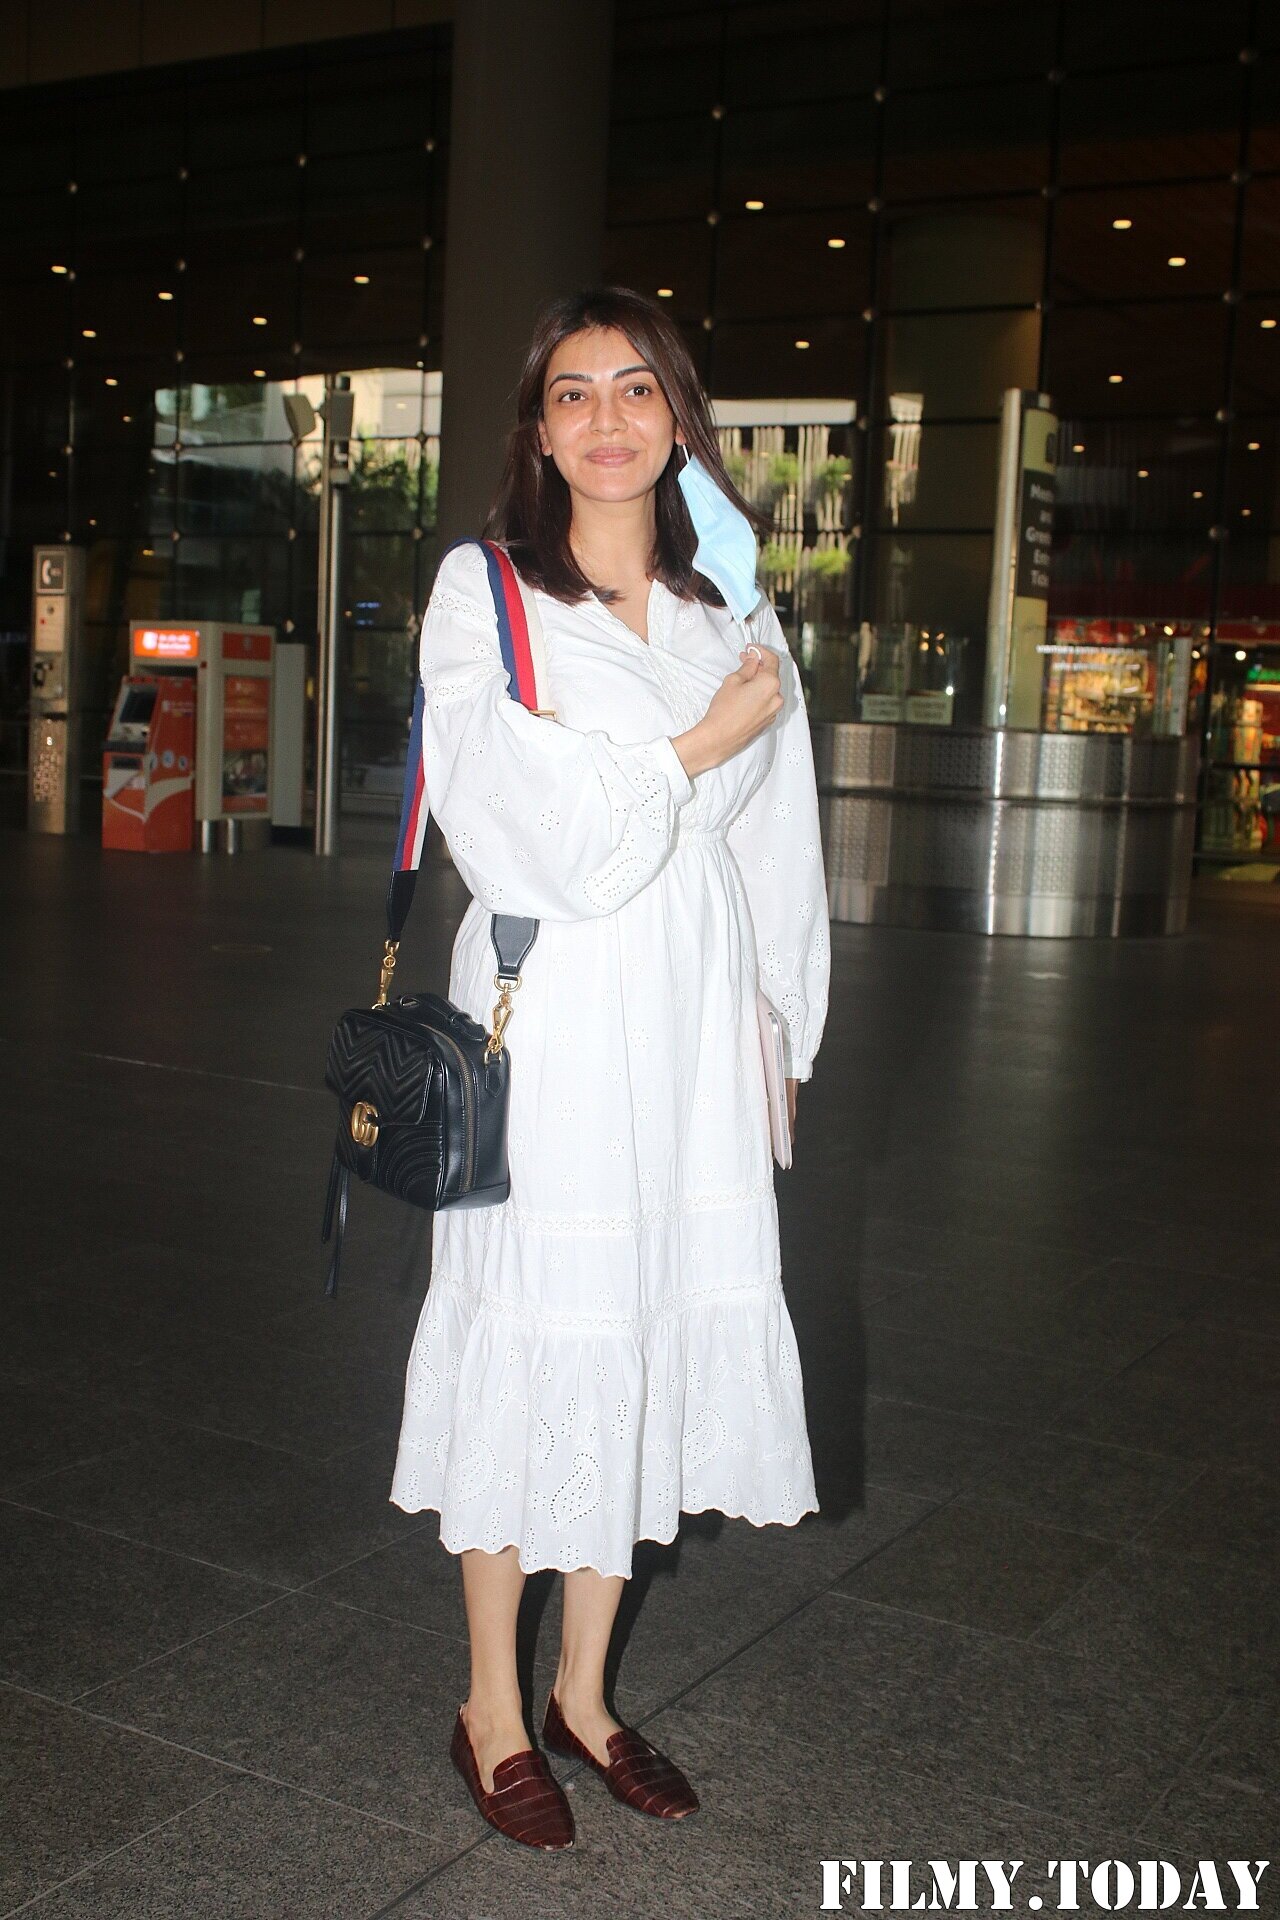 Kajal Aggarwal - Photos: Celebs Spotted At Airport | Picture 1828629